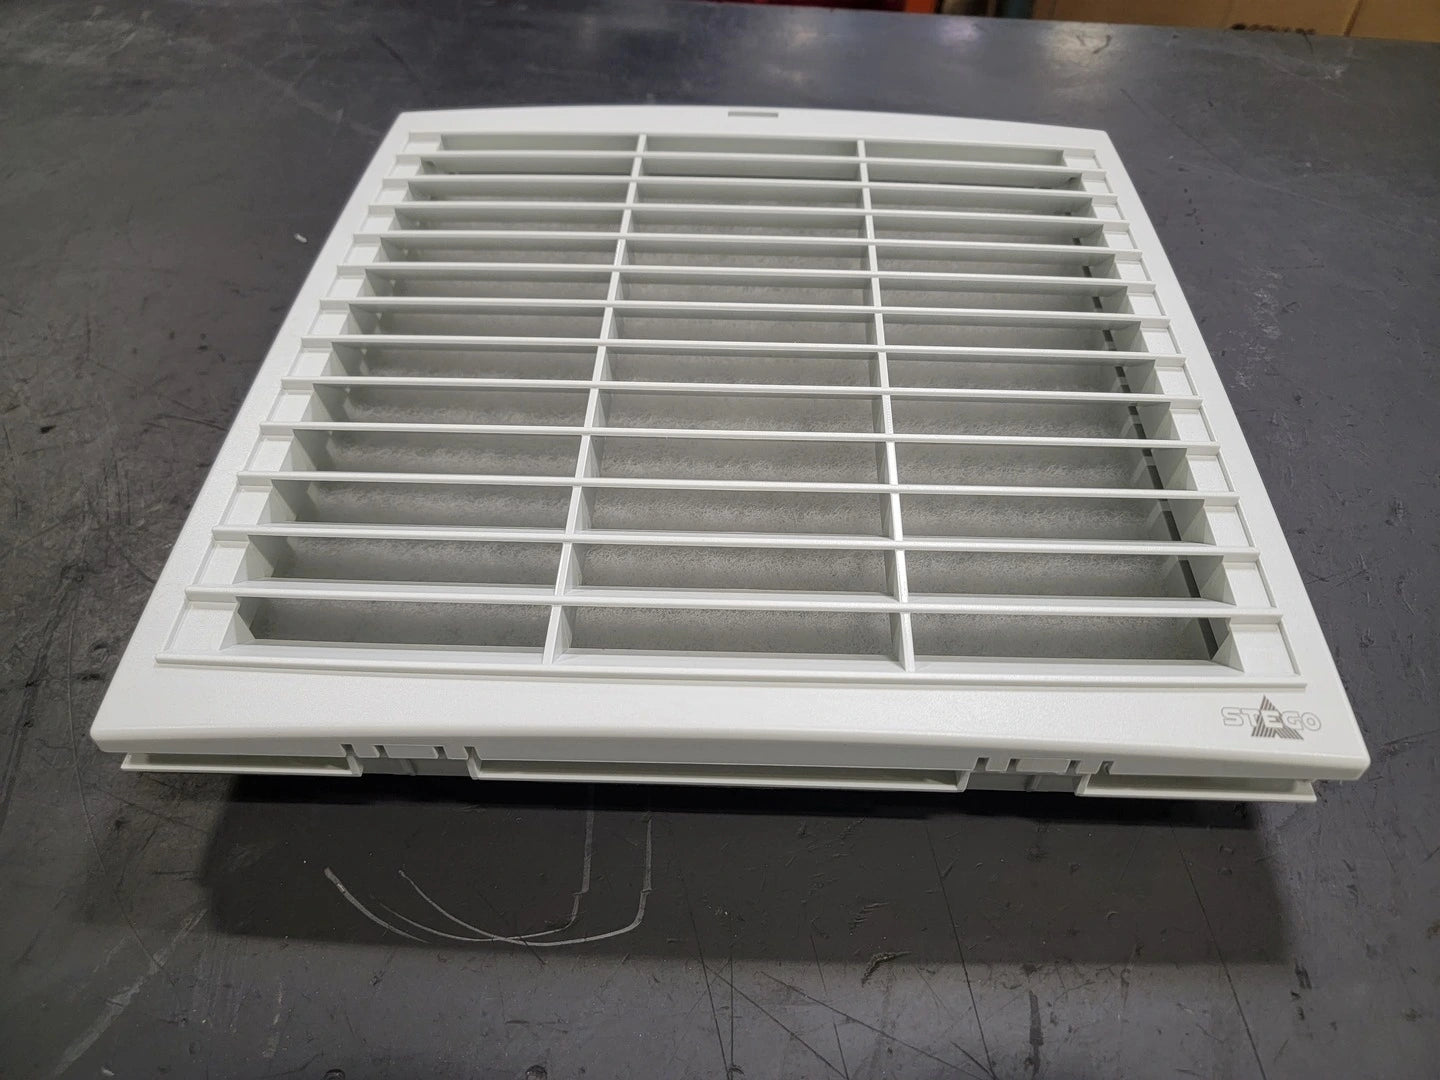 Entry Filter For Fan, 322x322 mm, 11884.0-30